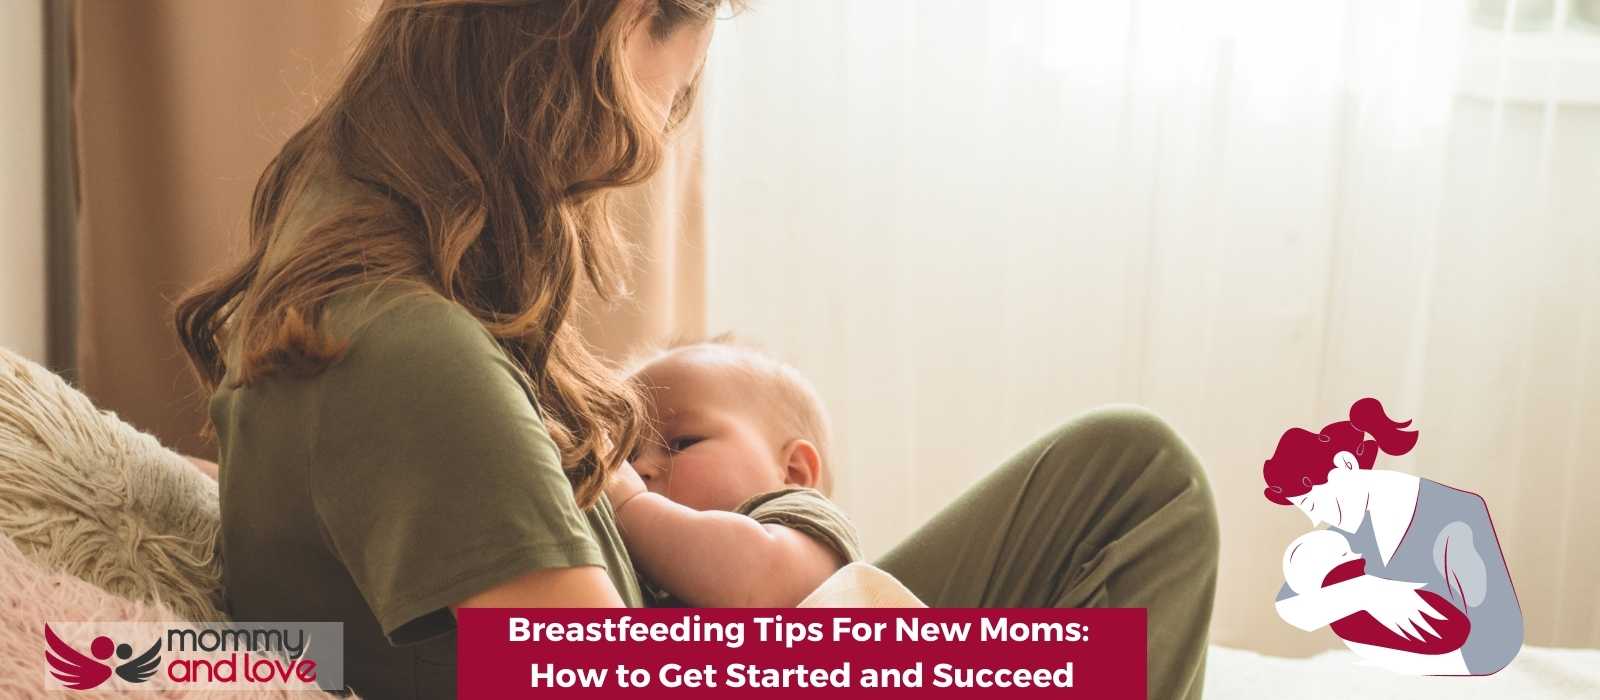 Breastfeeding Tips For New Moms: How to Get Started and Succeed